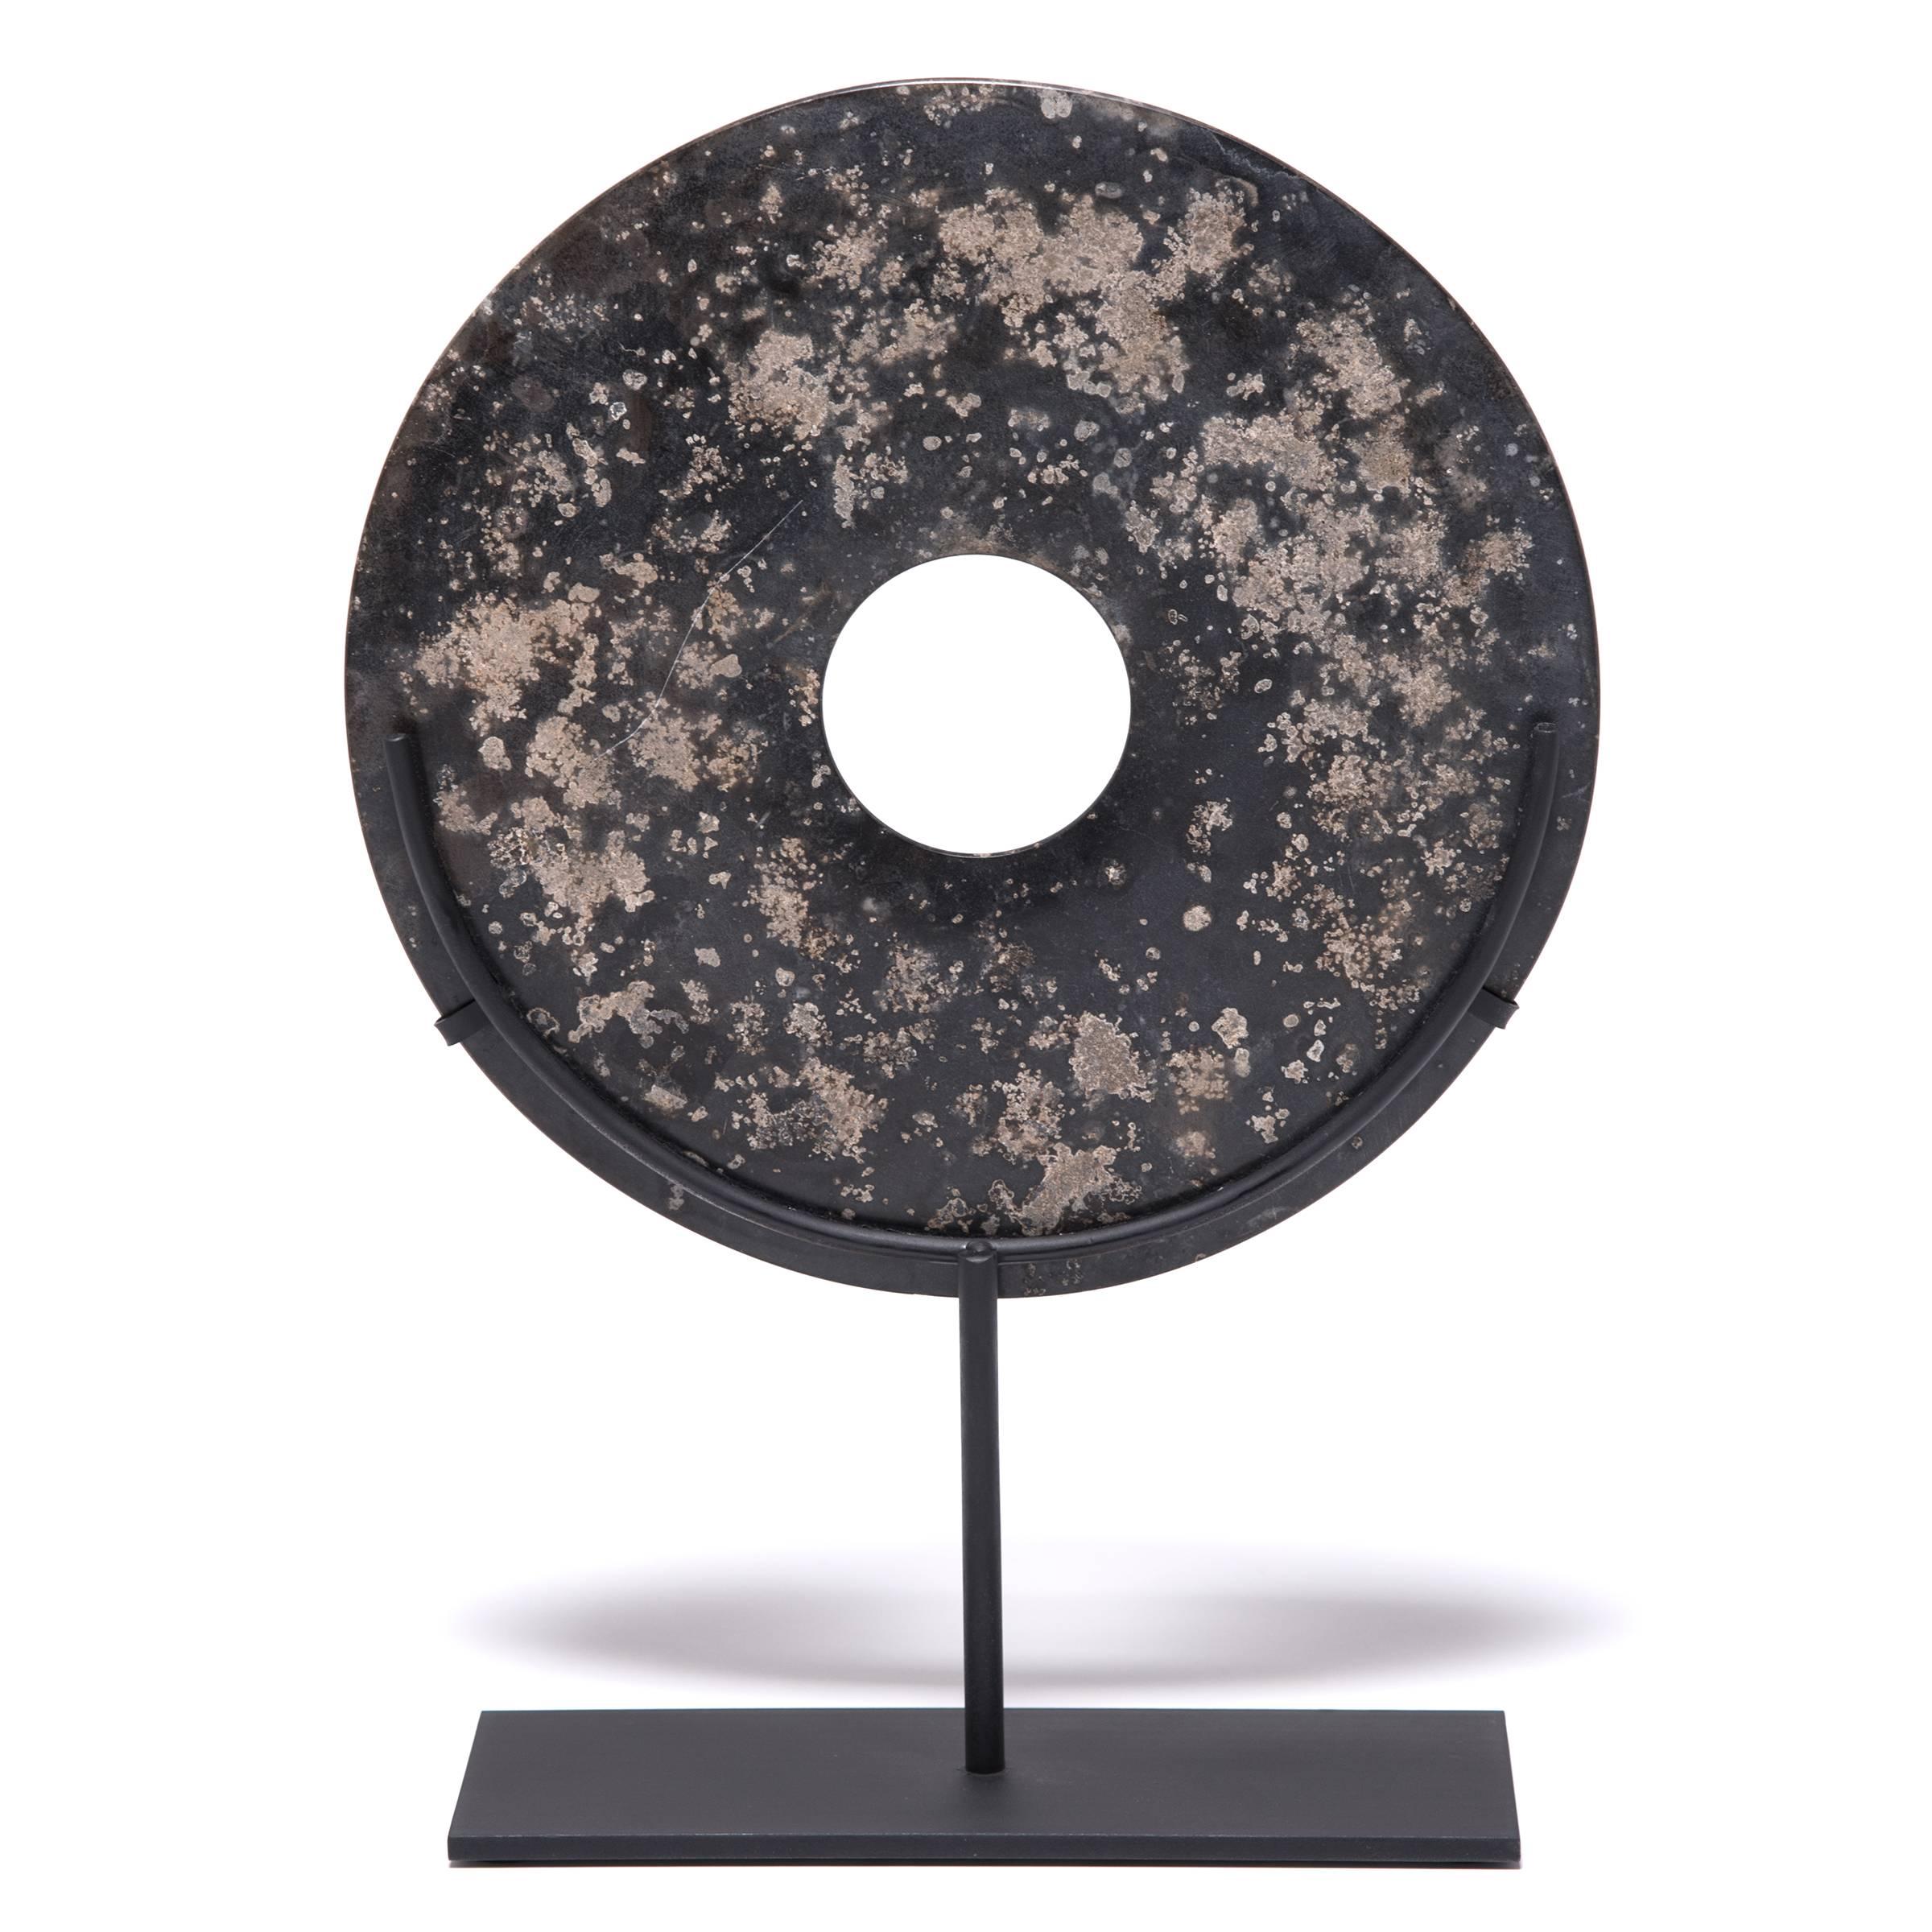 Jades have been cherished for thousands of years, with their rich heritage, beauty, and rarity. Jade Bi discs, similar to this contemporary example, have been found in the tombs of ancient Chinese emperors and aristocrats, but no one knows their